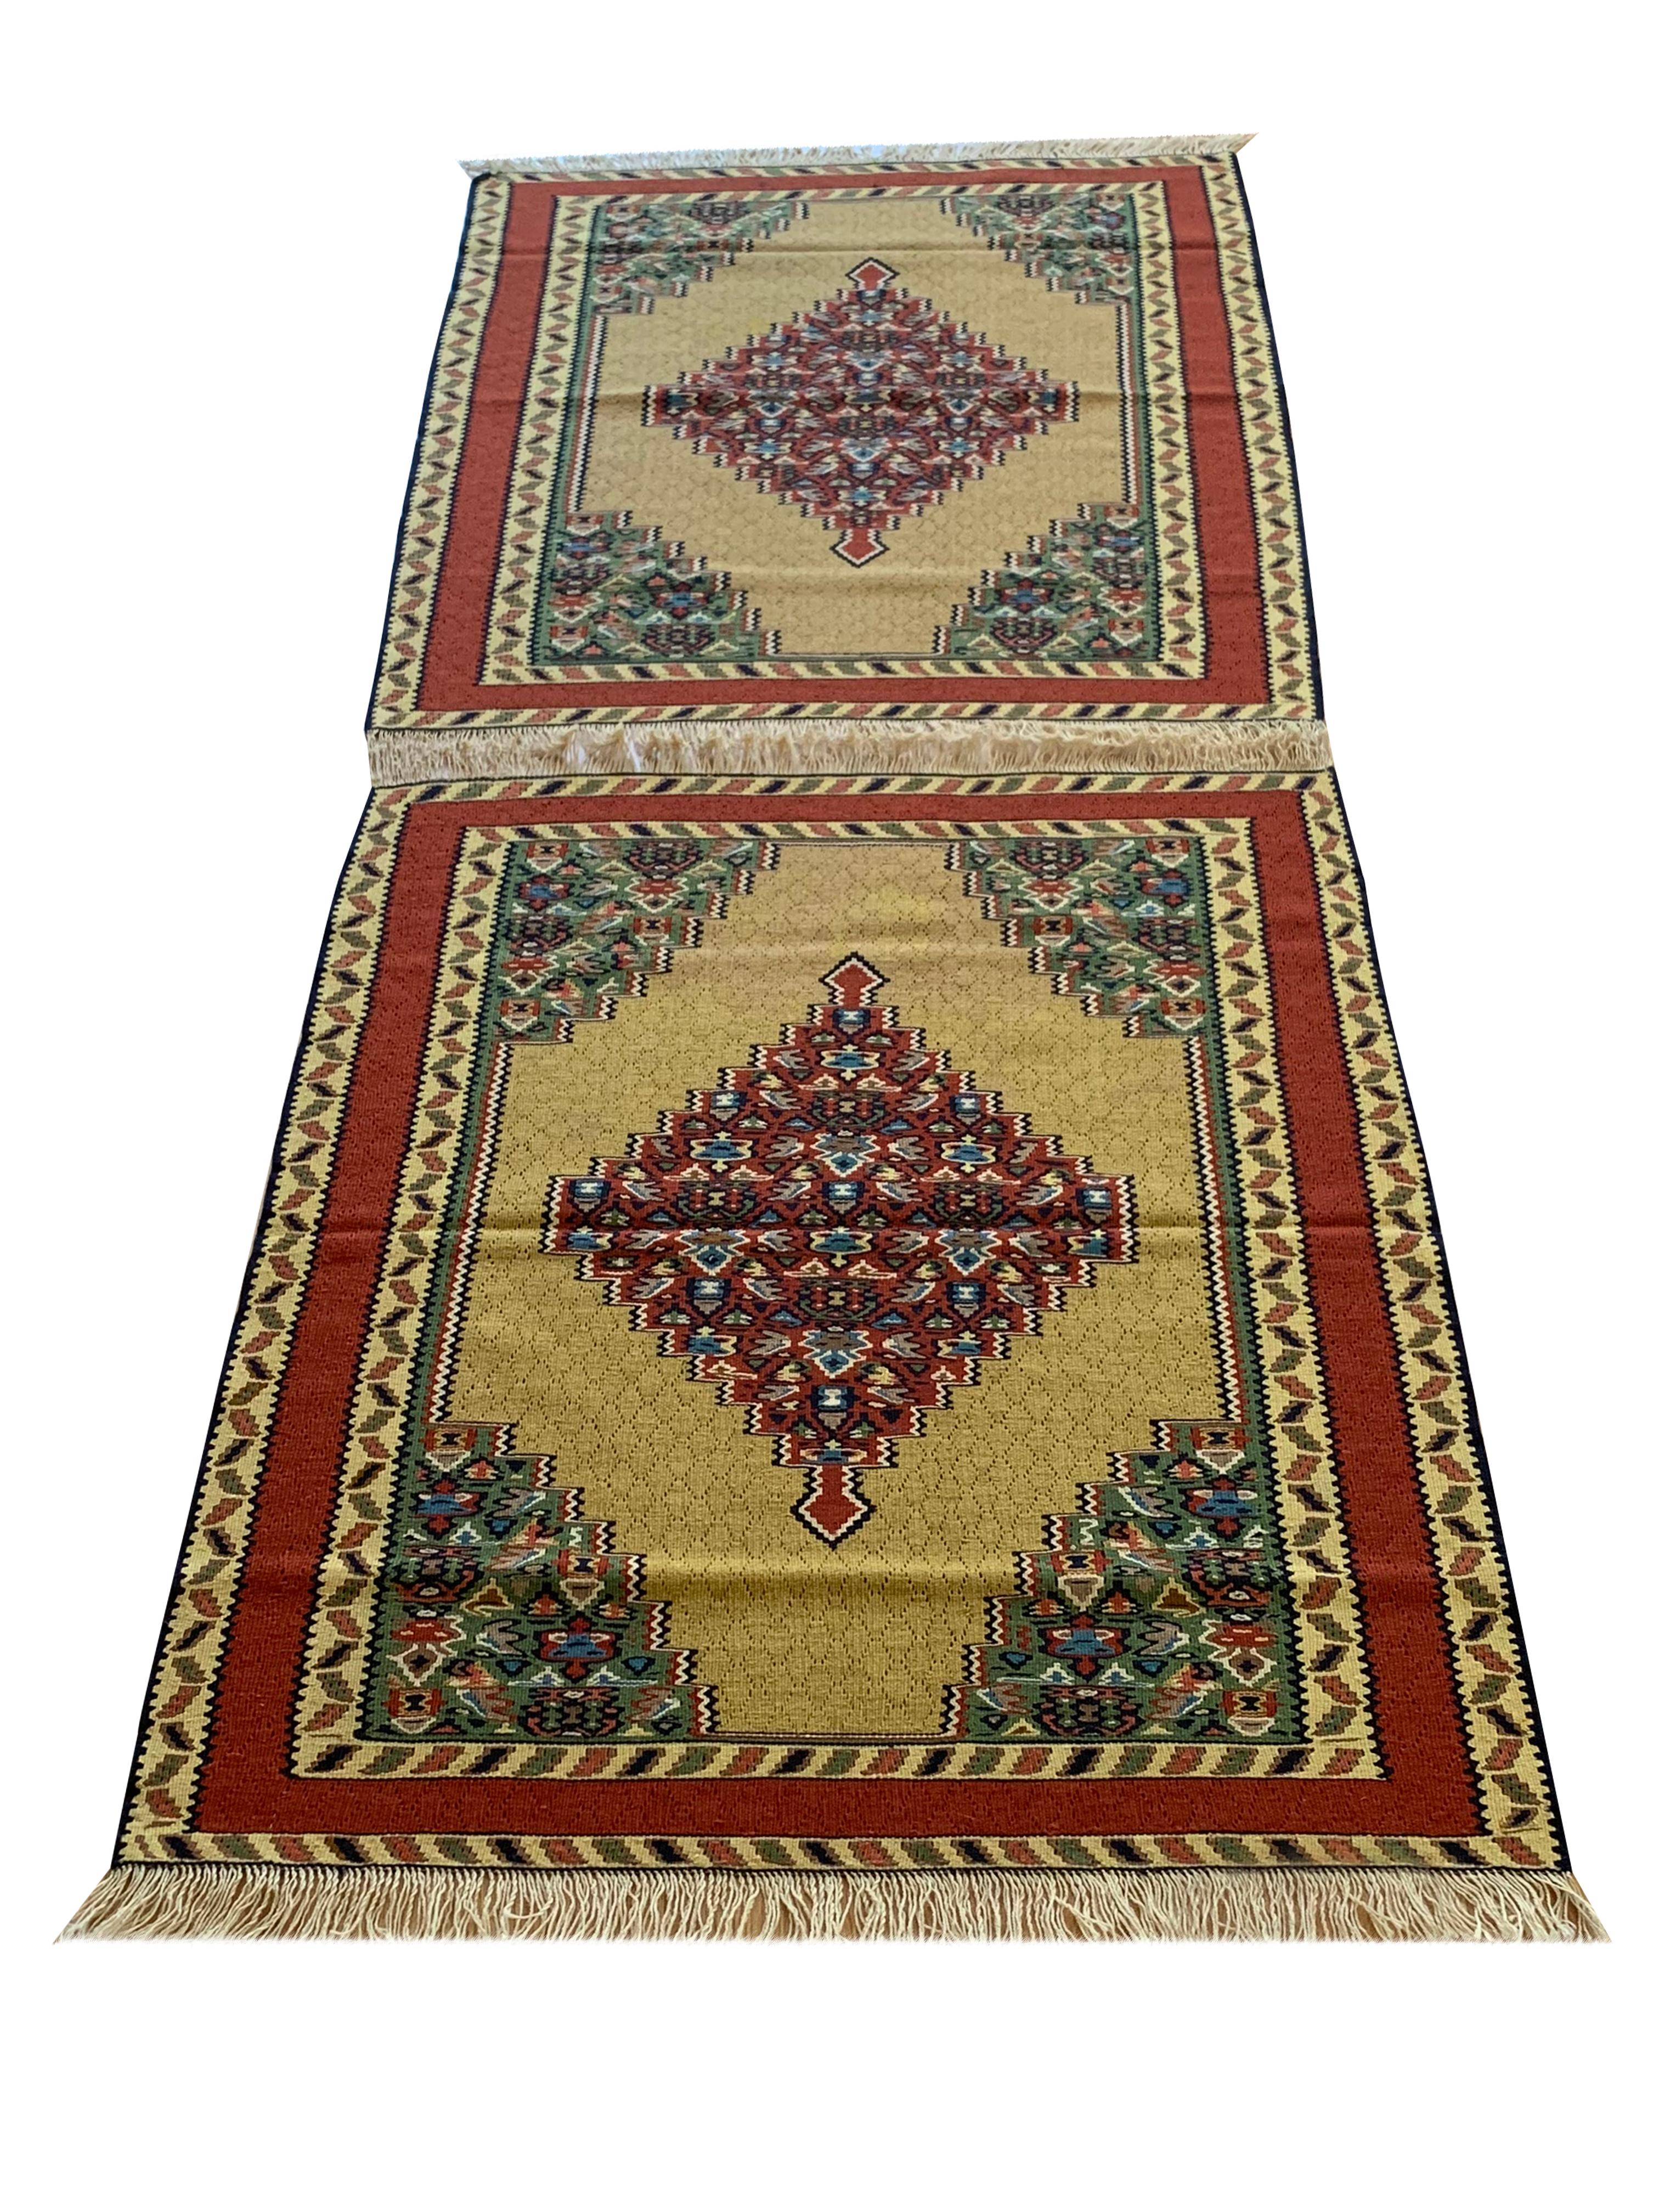 These beautiful Rugs are handmade, flatwoven kilims woven in the early 21st century, circa 2010. It is unused and so is in excellent condition. The design features a bold yellow background that has been decorated with an intricate decorative